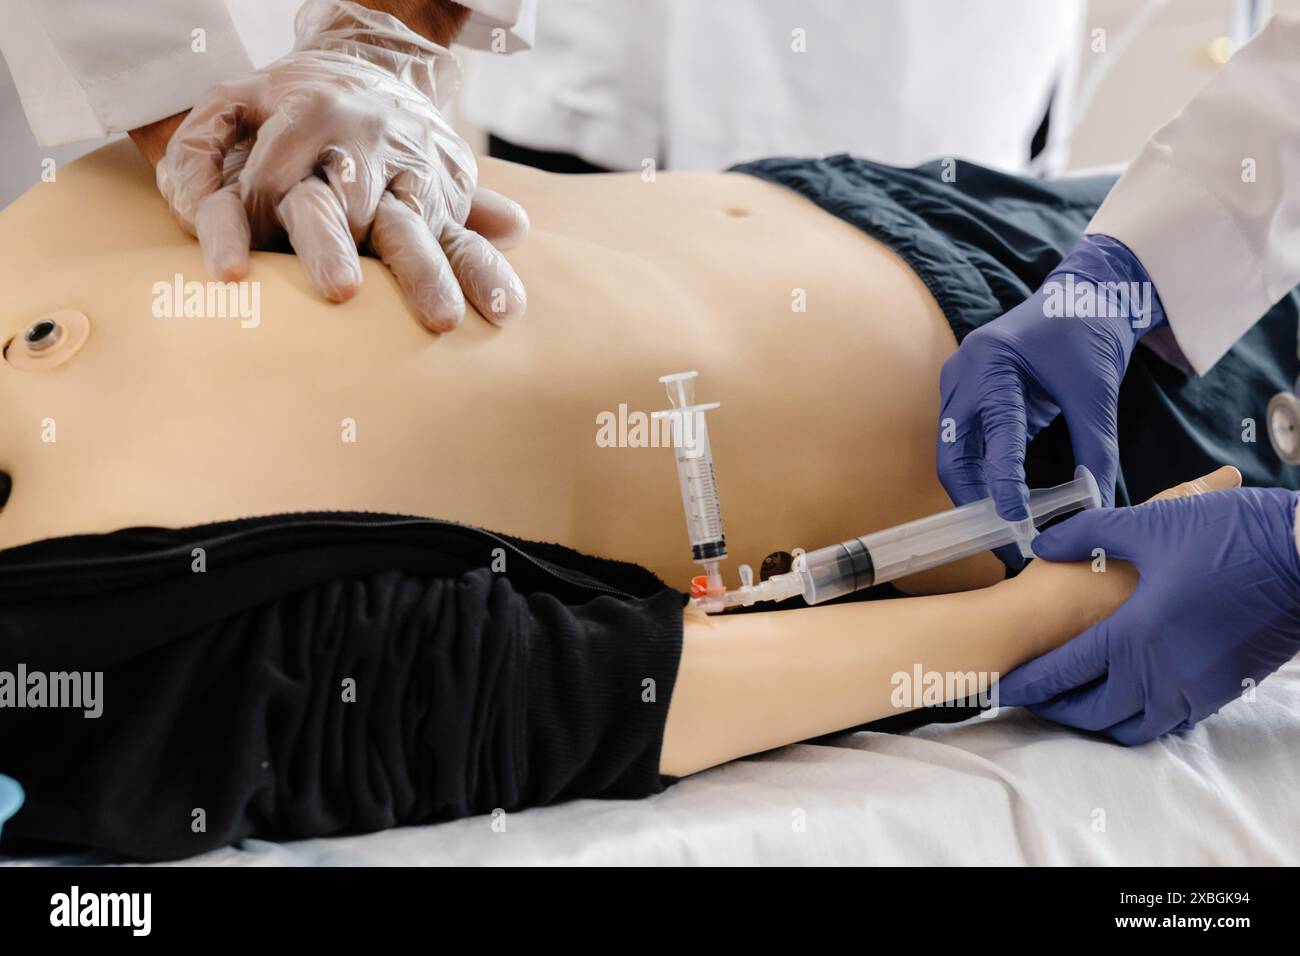 A medical student practices intravenous injection on a training dummy during a practical skills training session. Stock Photo